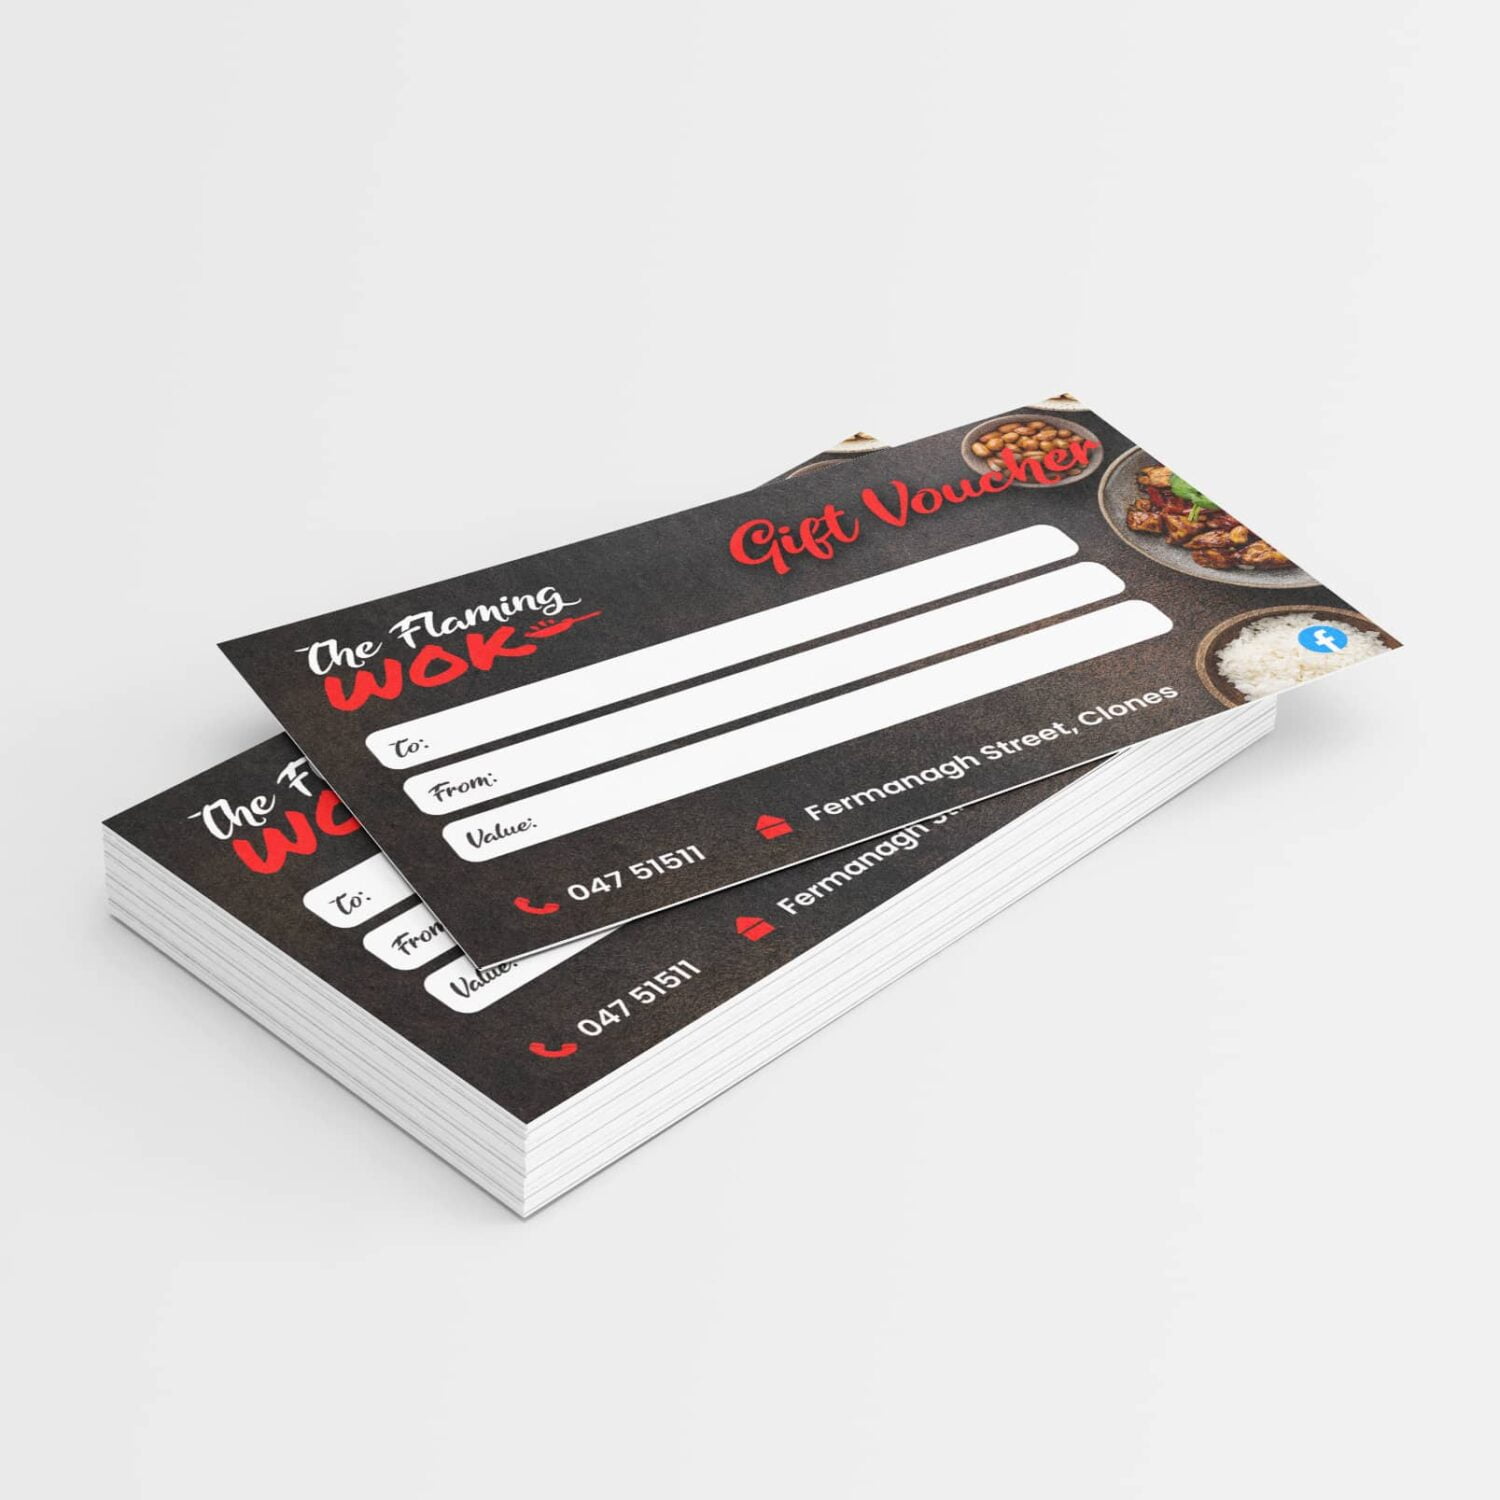 Gift Voucher Printing in County Monaghan, Ireland